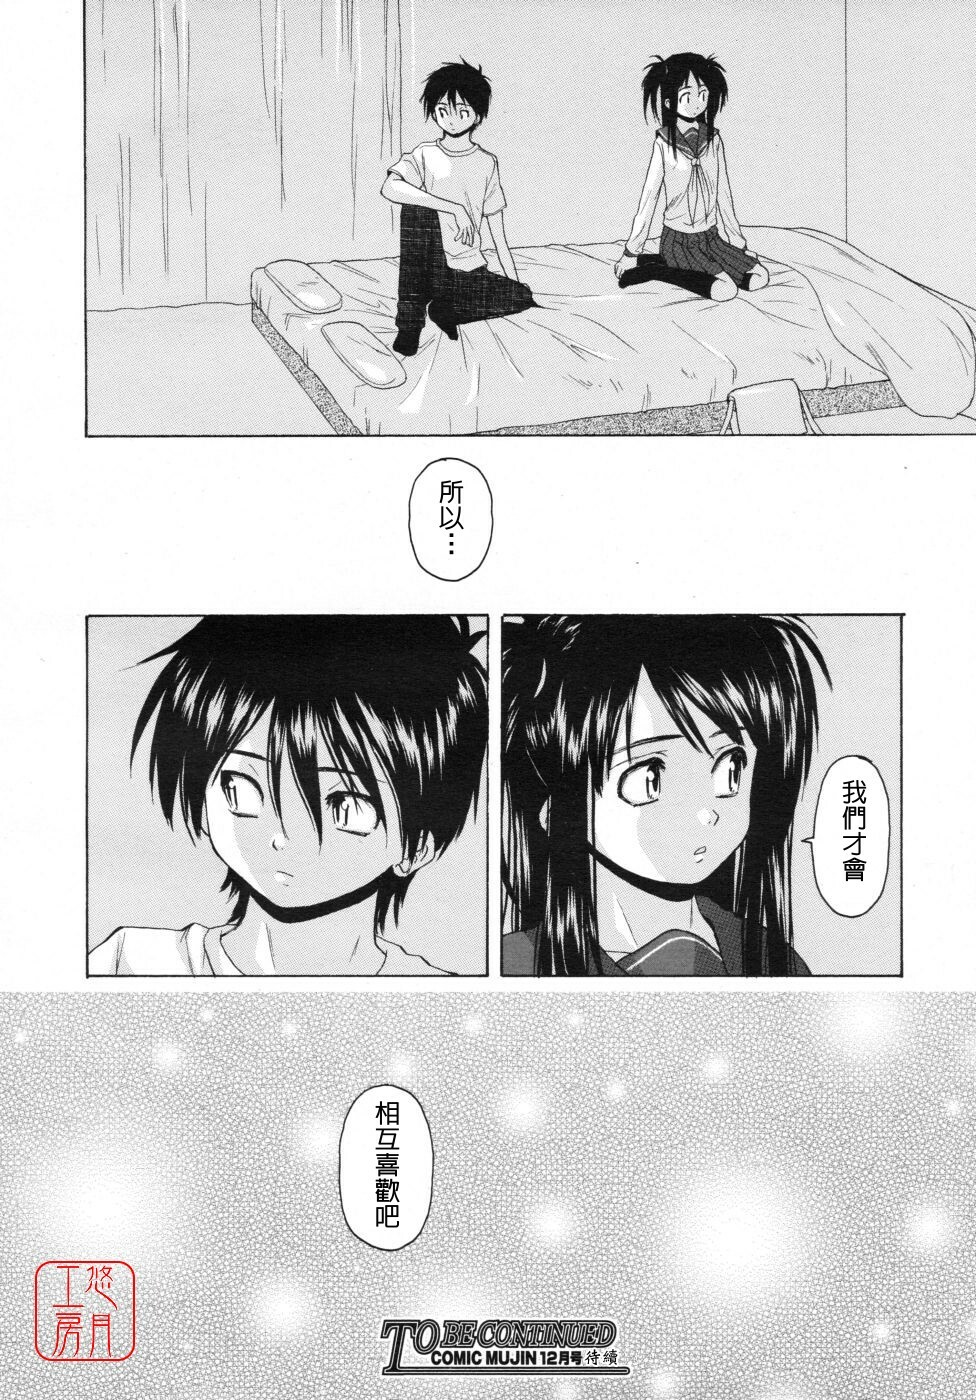 [Fuuga] Girl Friend 2 (Chinese) page 38 full